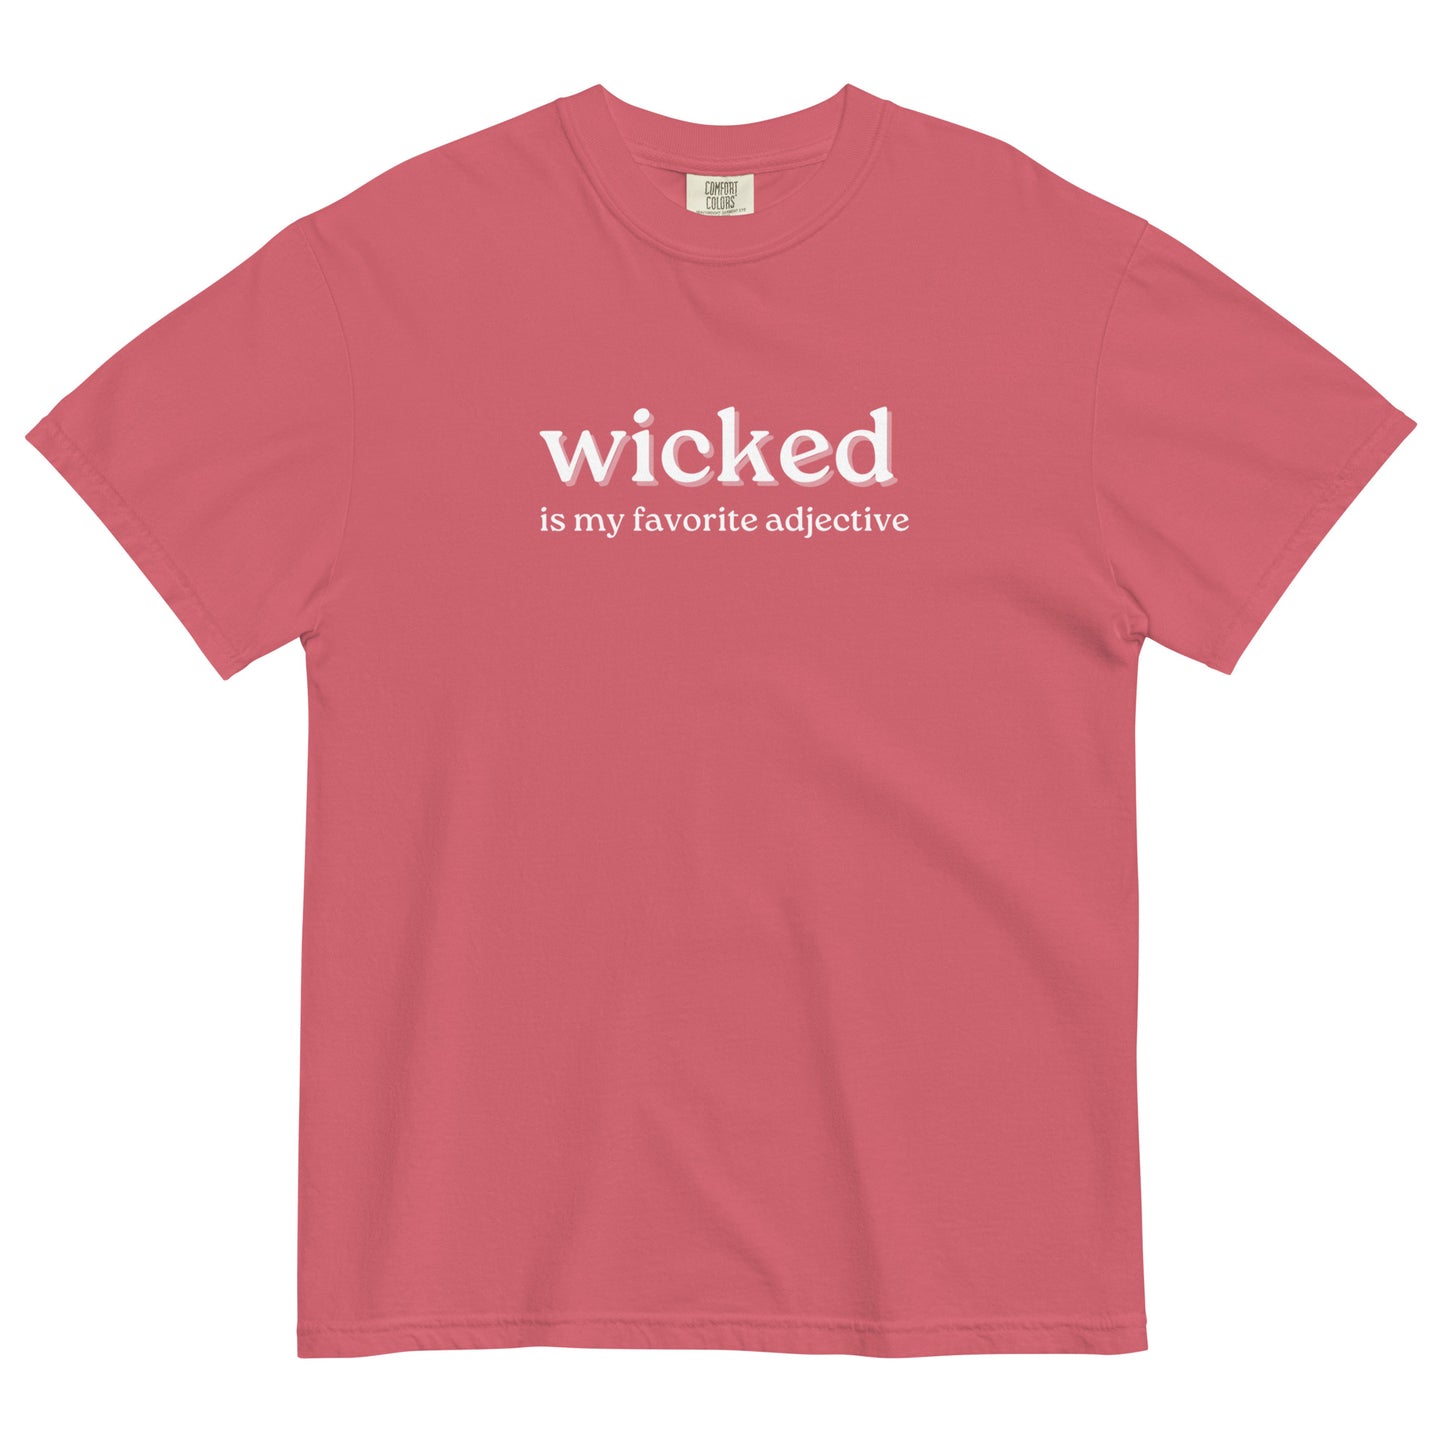 light red tshirt that says "wicked is my favorite adjective" in white lettering